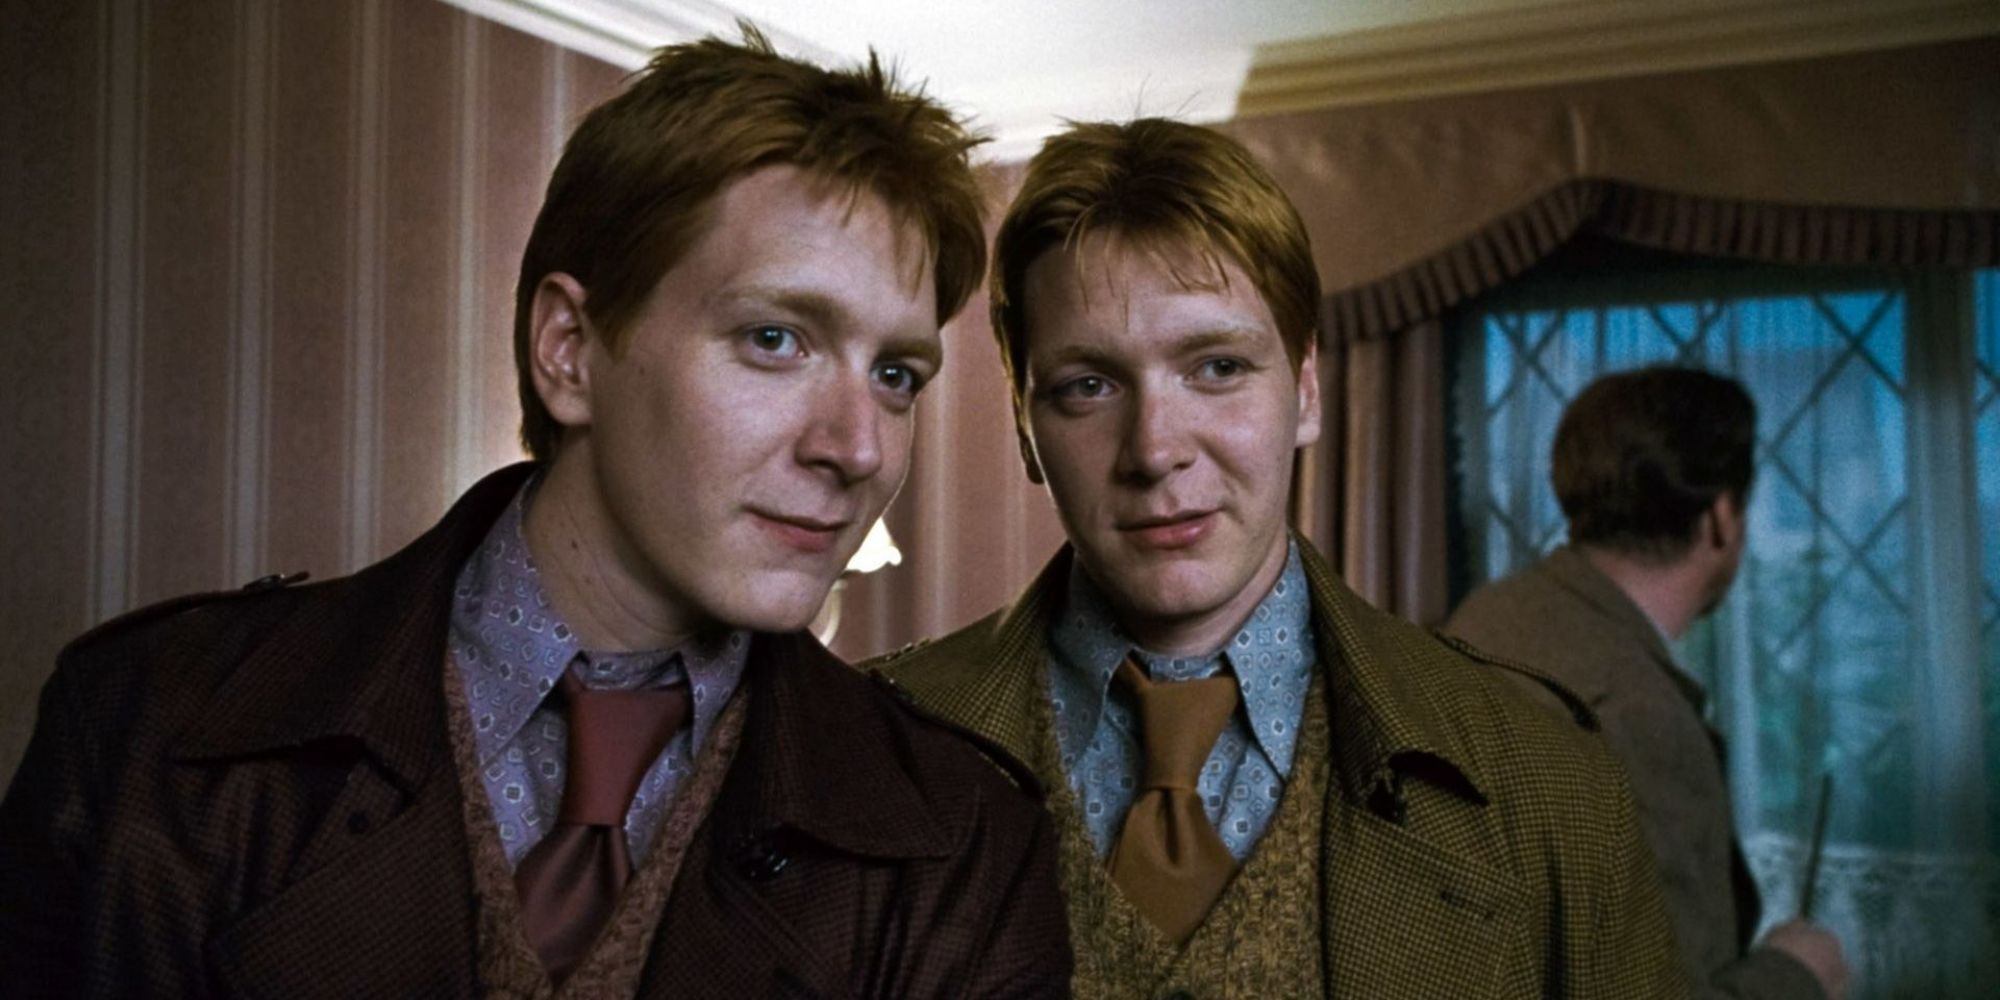 Harry-Potter-and-the-Deathly-Hallows-Part-1-Fred-and-George-Weasley (1)